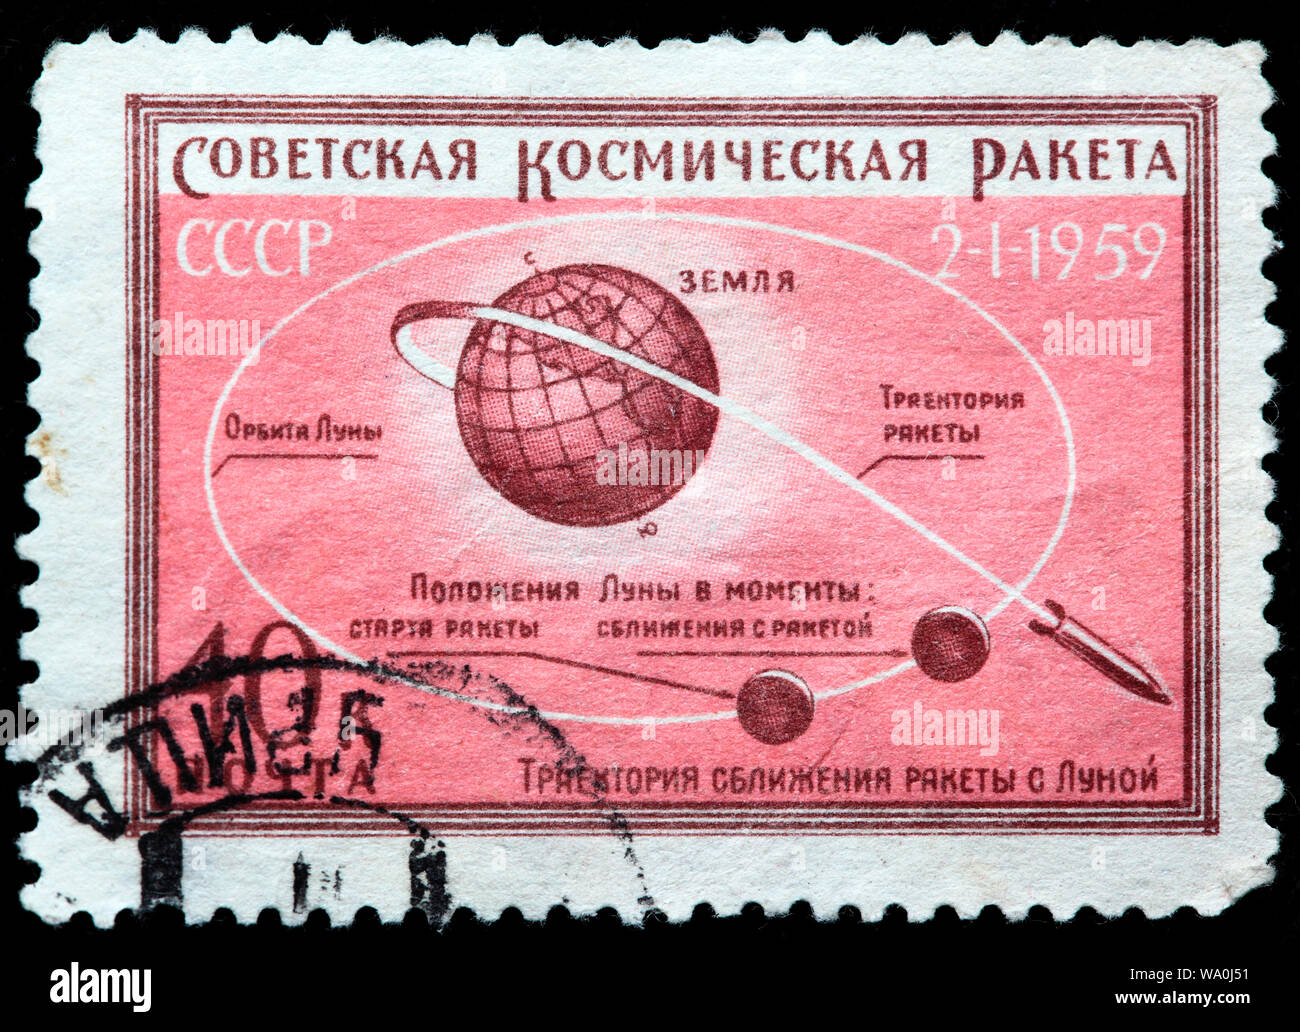 Launch of the first space moon rocket, postage stamp, Russia, USSR, 1959 Stock Photo